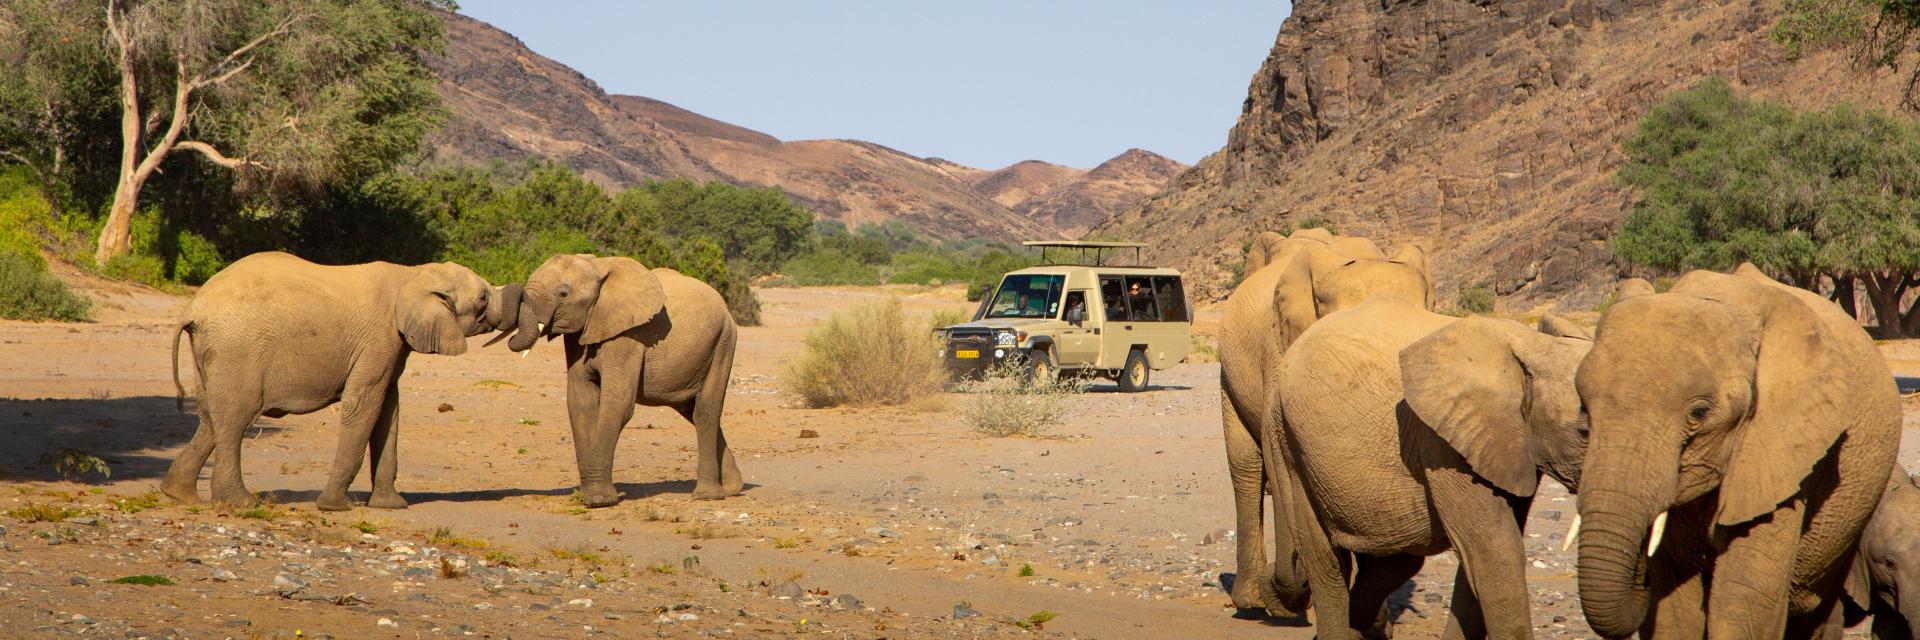 Elephants nearby in one of the dry riverbeds.